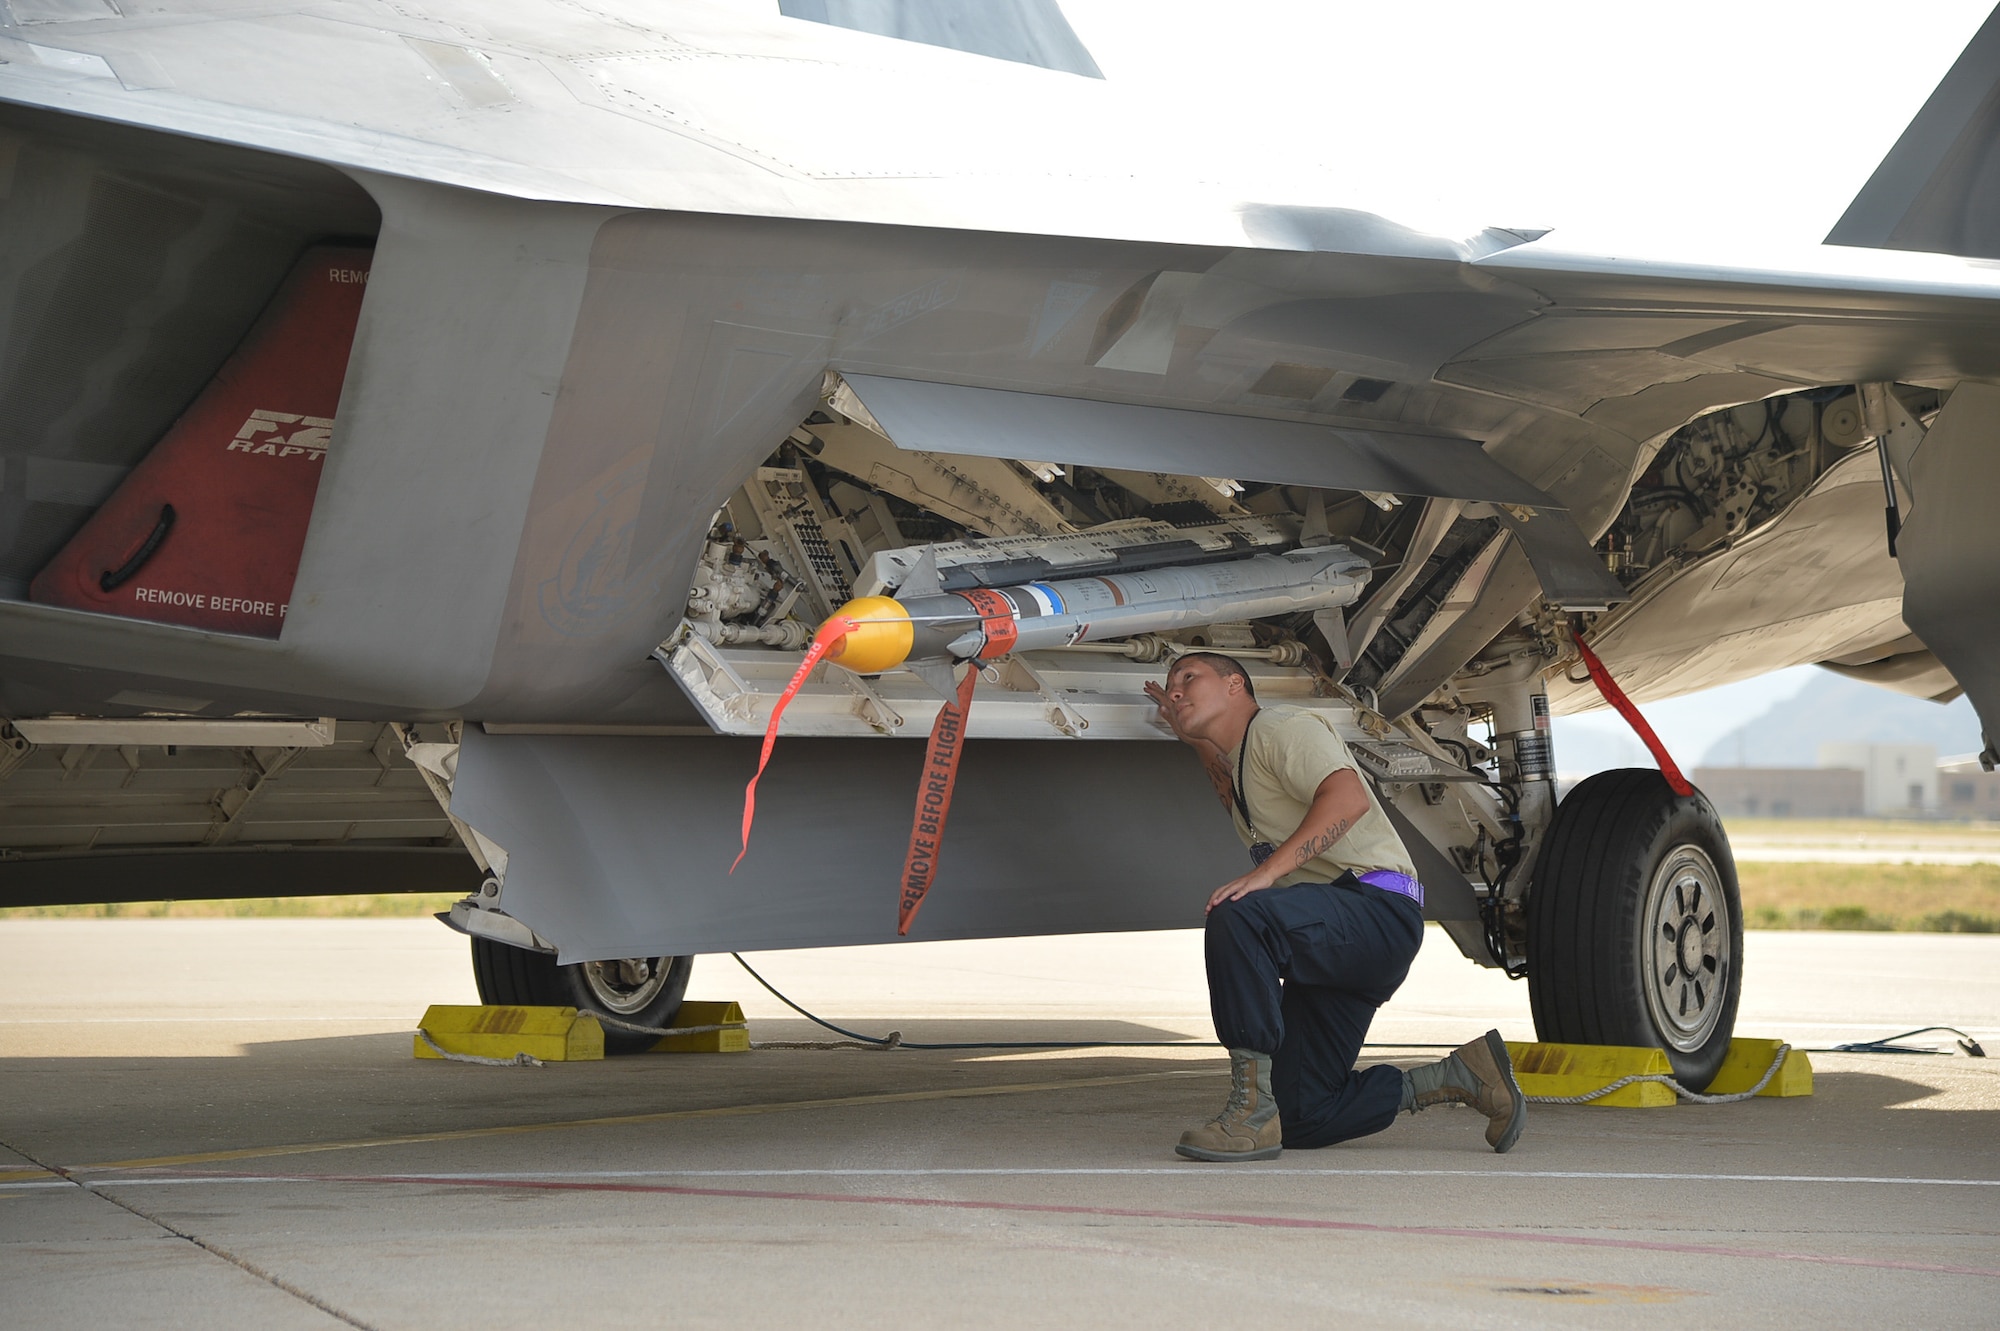 Staff Sgt. Anthony Ovechka, 95th Aircraft Maintenance Unit weapons load team chief, Tyndall Air Force Base, Fla., inspects an AIM-9X missile installation on an F-22 Raptor aircraft prior to launch during the Combat Archer exercise at Hill Air Force Base, Utah, Aug. 18, 2016. (U.S. Air Force photo by R. Nial Bradshaw)